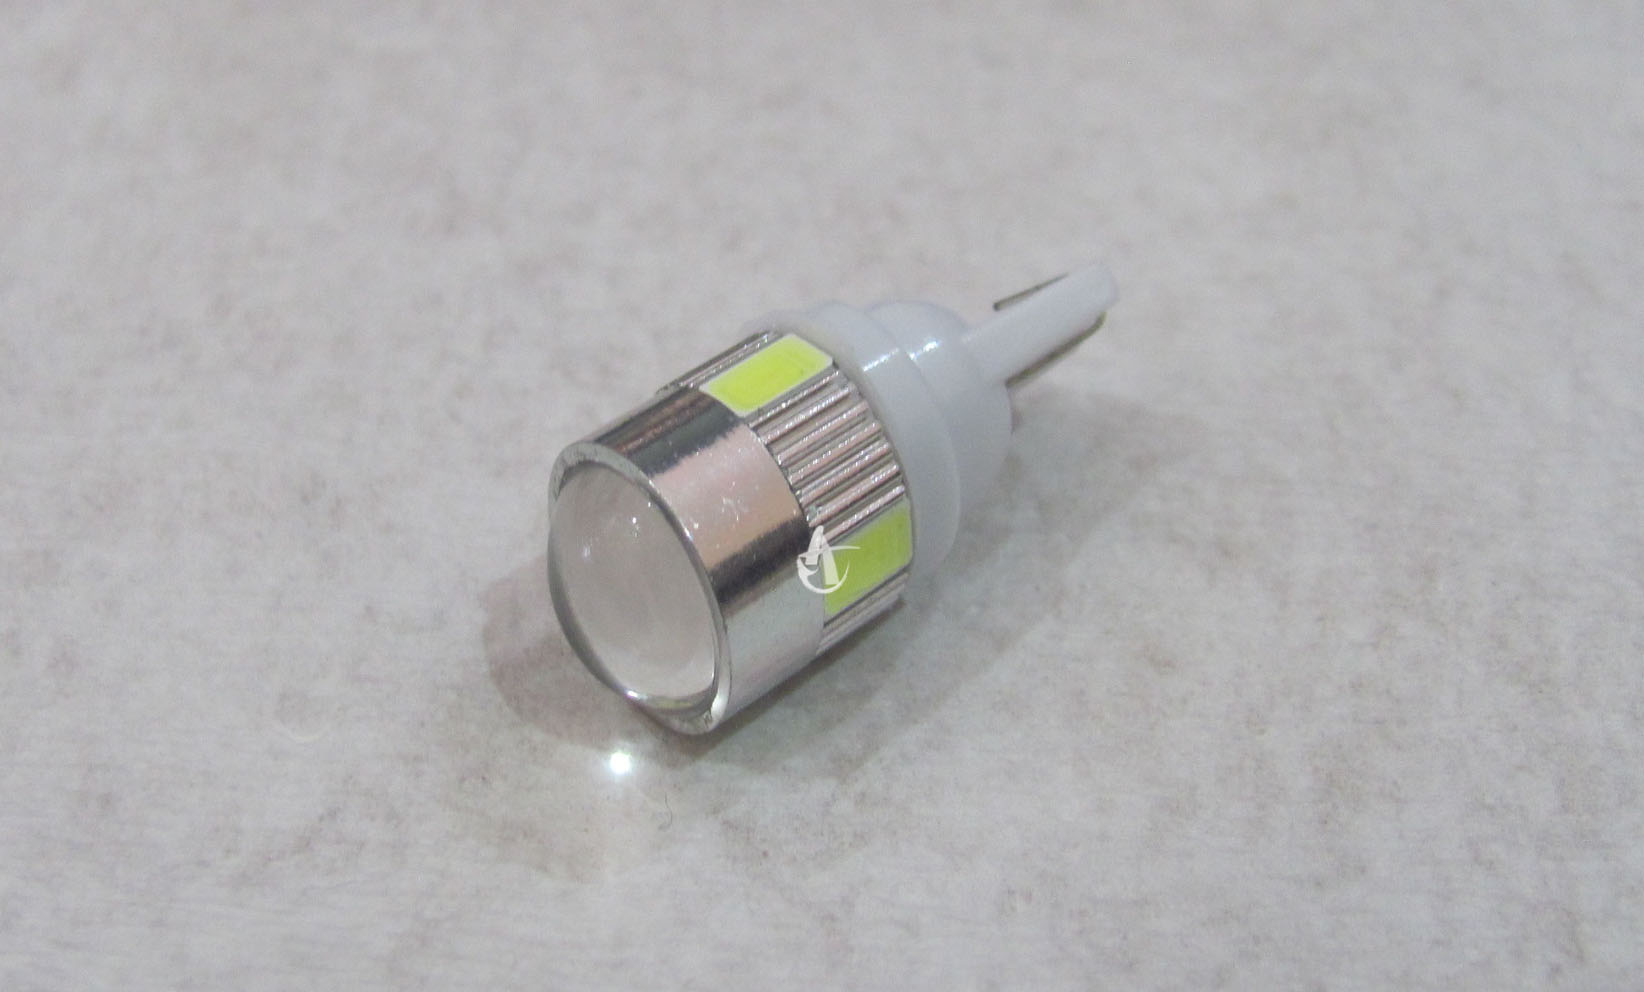 LED Canbus 6SMD-2 5730 T10 (W5W)